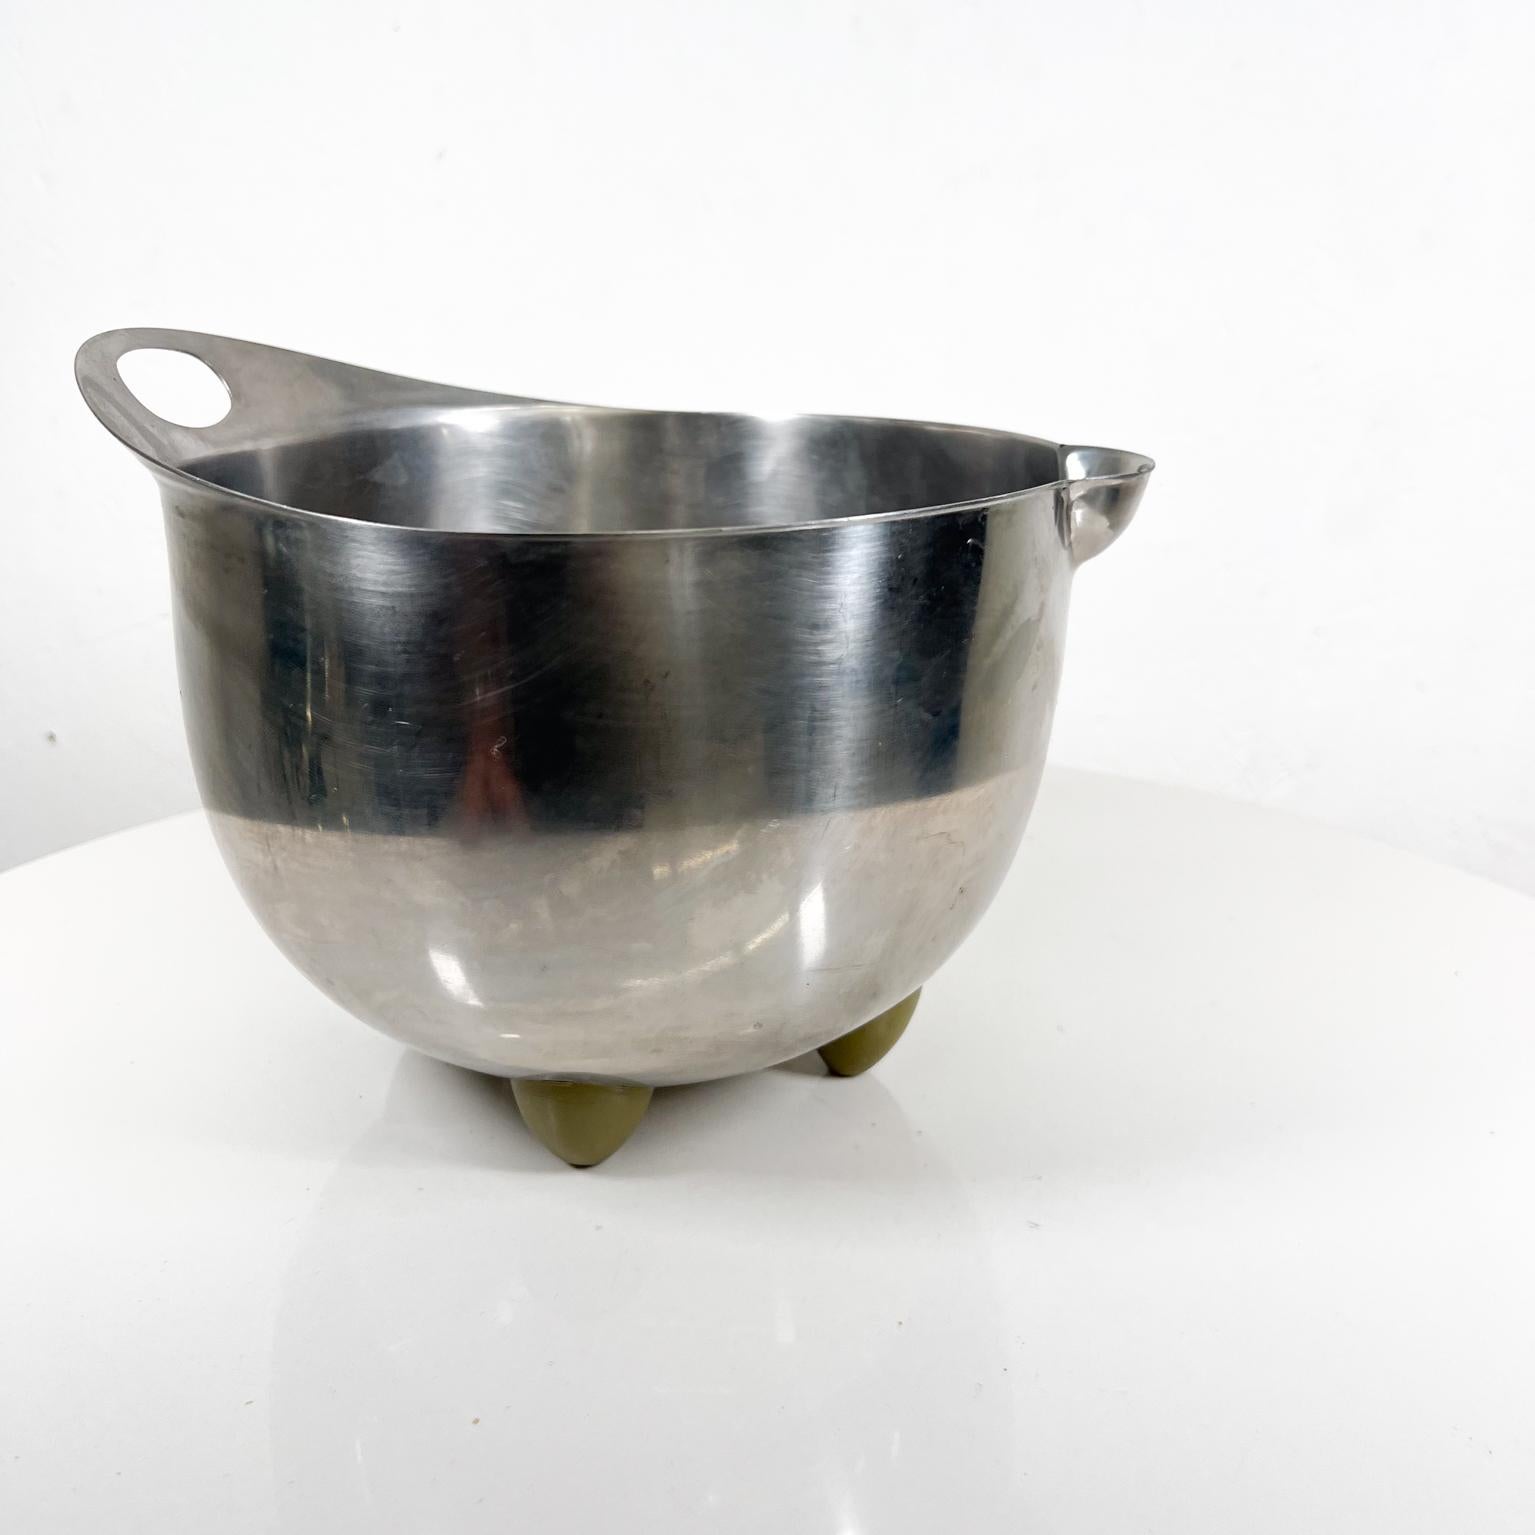 1985 Michael Graves Design Stainless Steel Footed Mixing Bowl For Sale 1